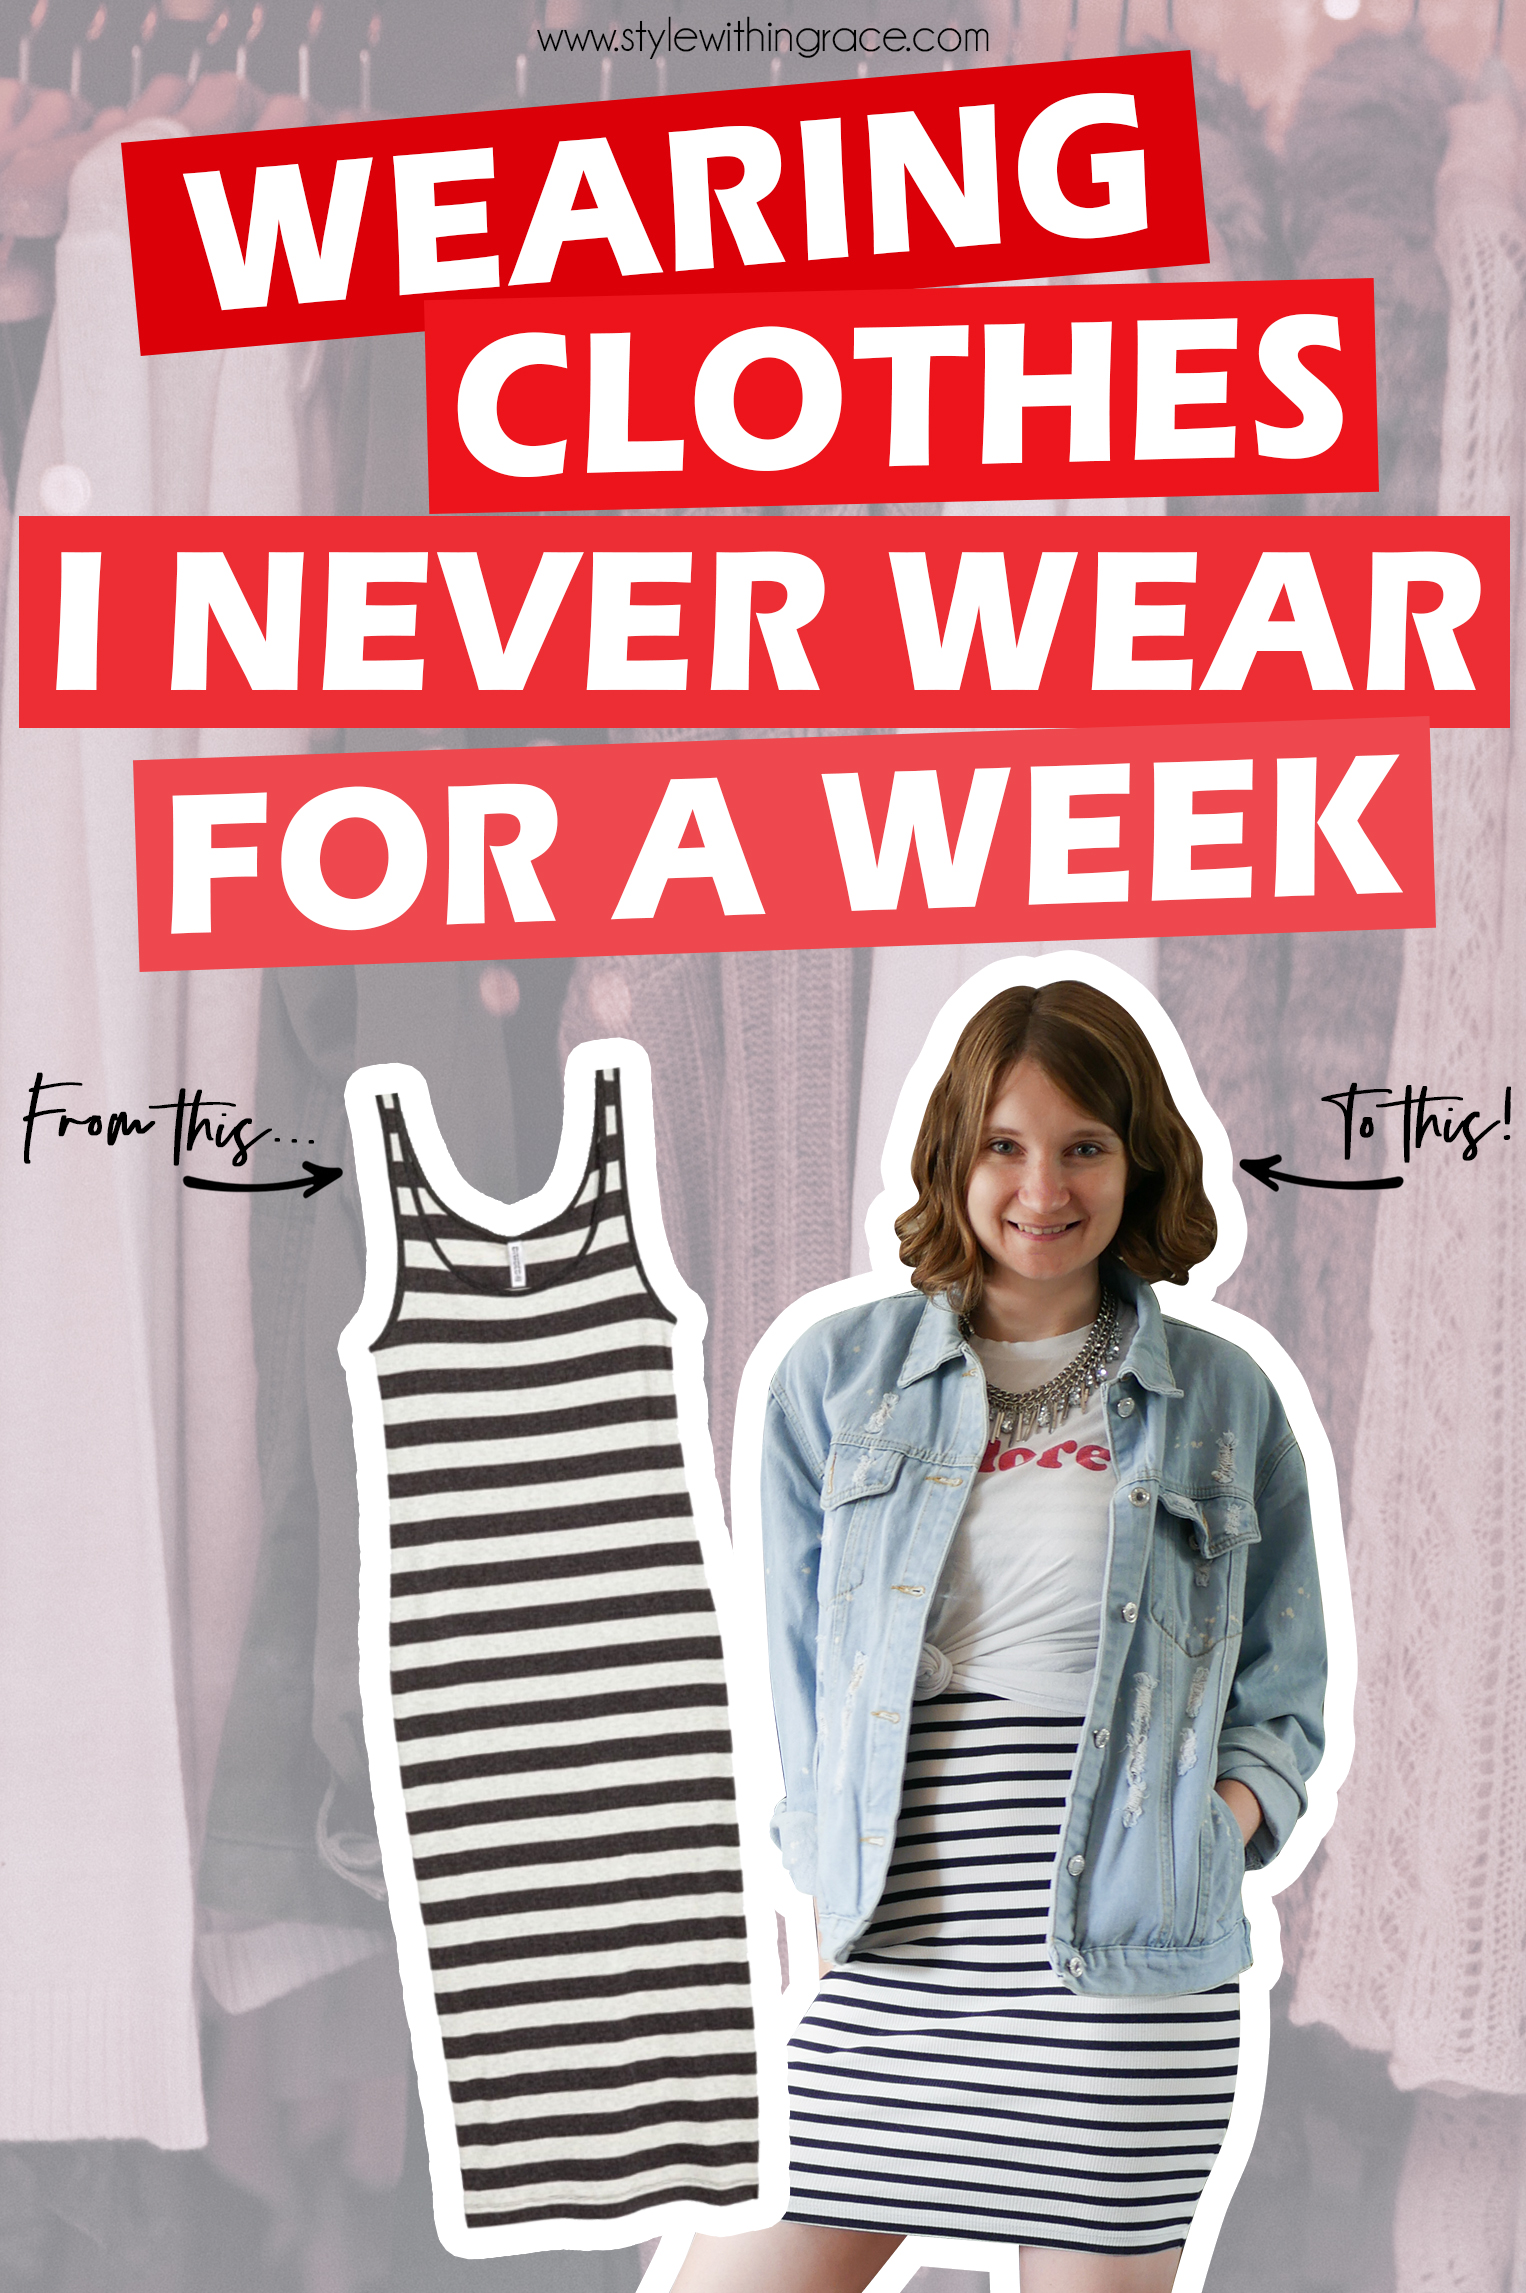 Wearing Clothes I Never Wear For A Week - Style Within Grace